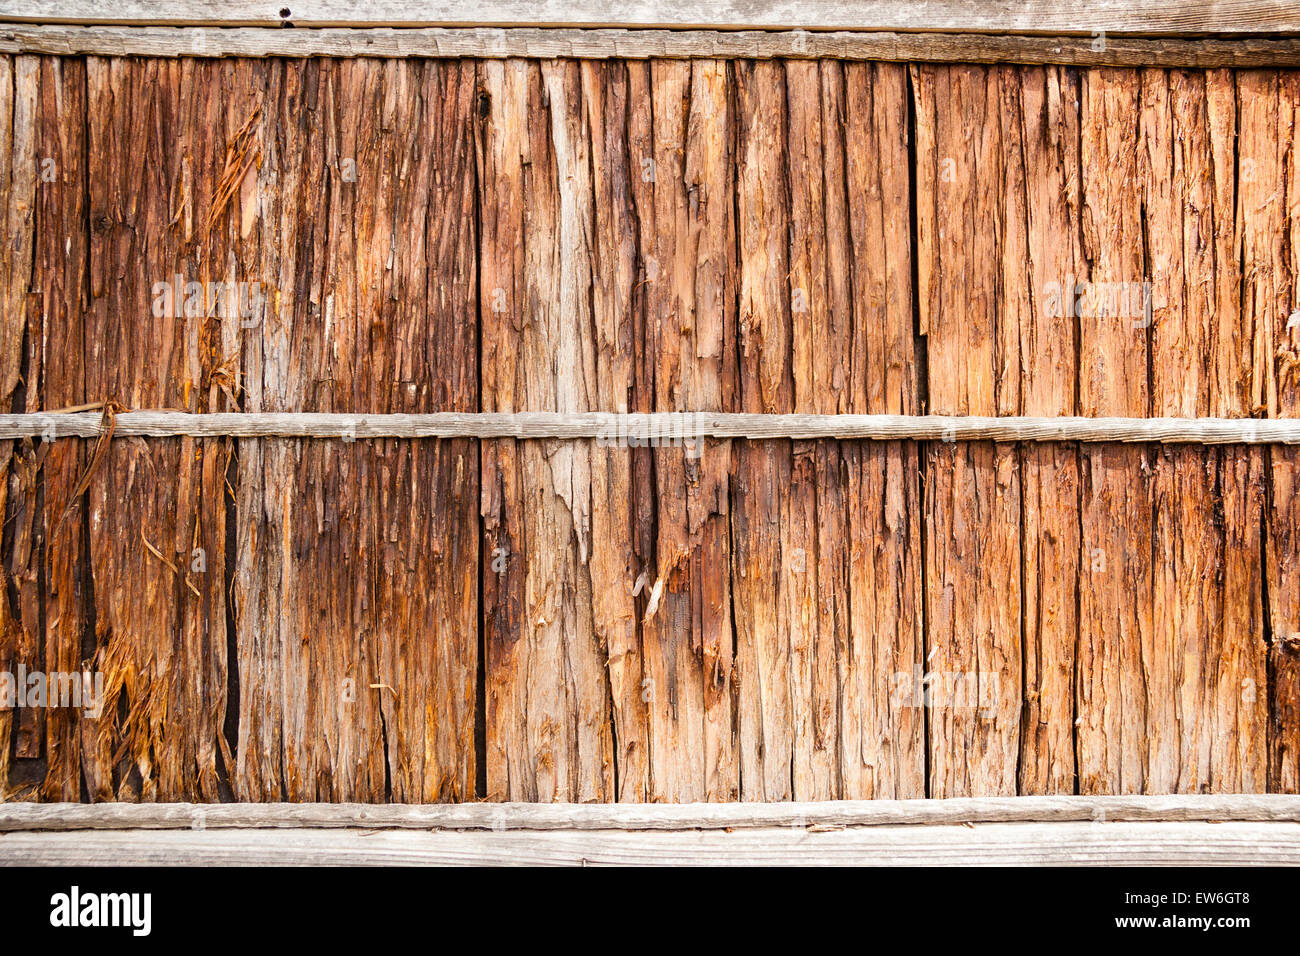 Japan, Onomichi. Traditional rural wooden fence made from tree bark with two horizontal support boards. Pattern. Stock Photo